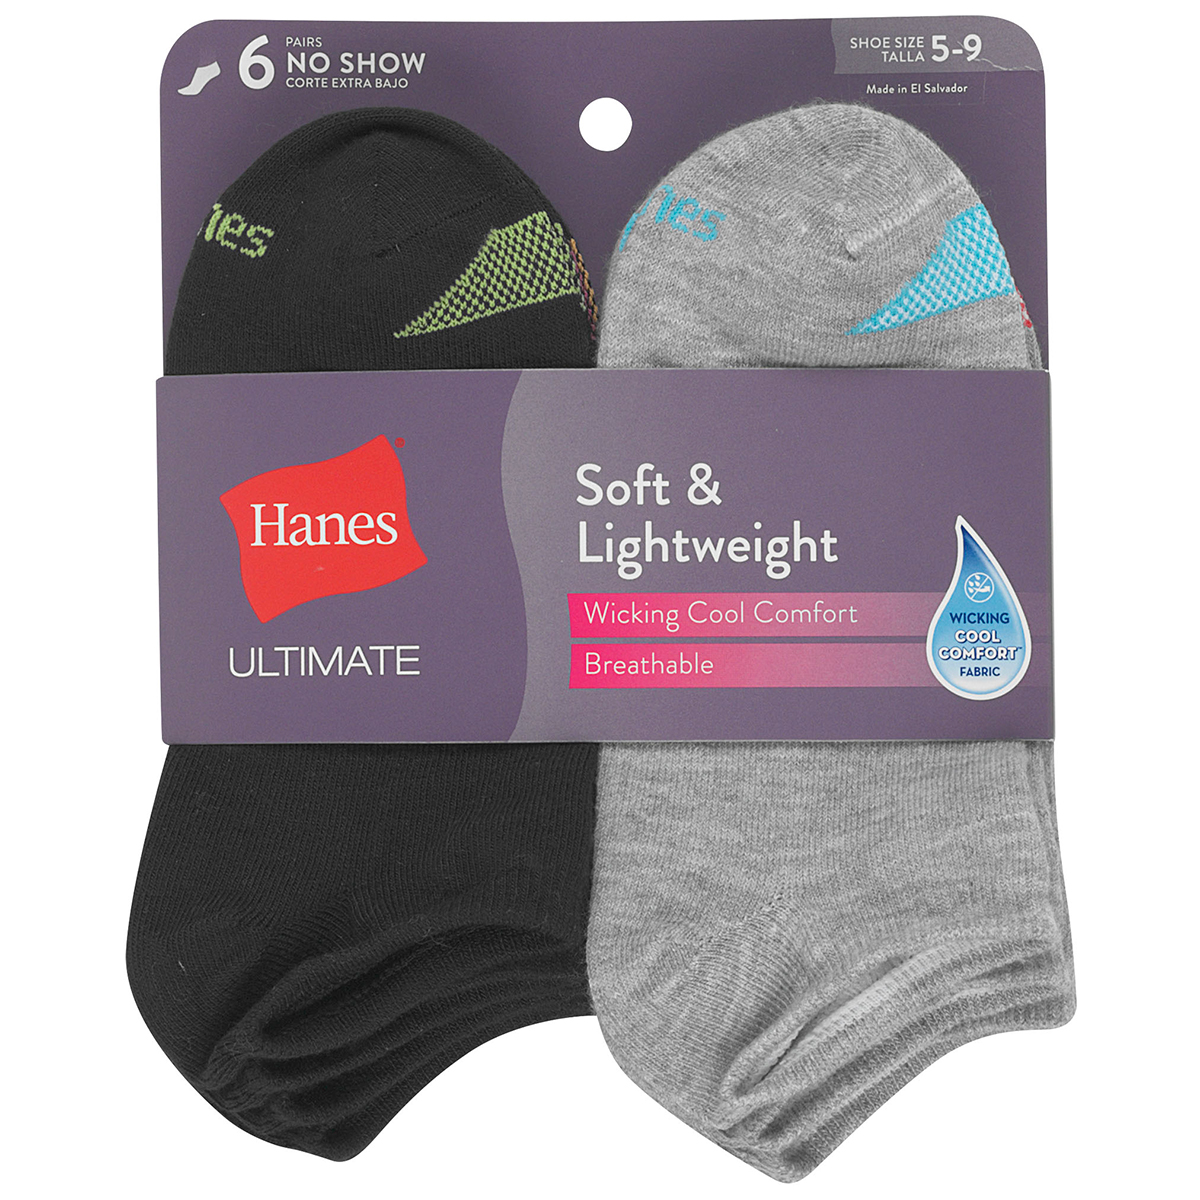 Hanes Woman's Ultimate Lightweight Breathable Wicking Cool Comfort No Show Socks, 6 Pack